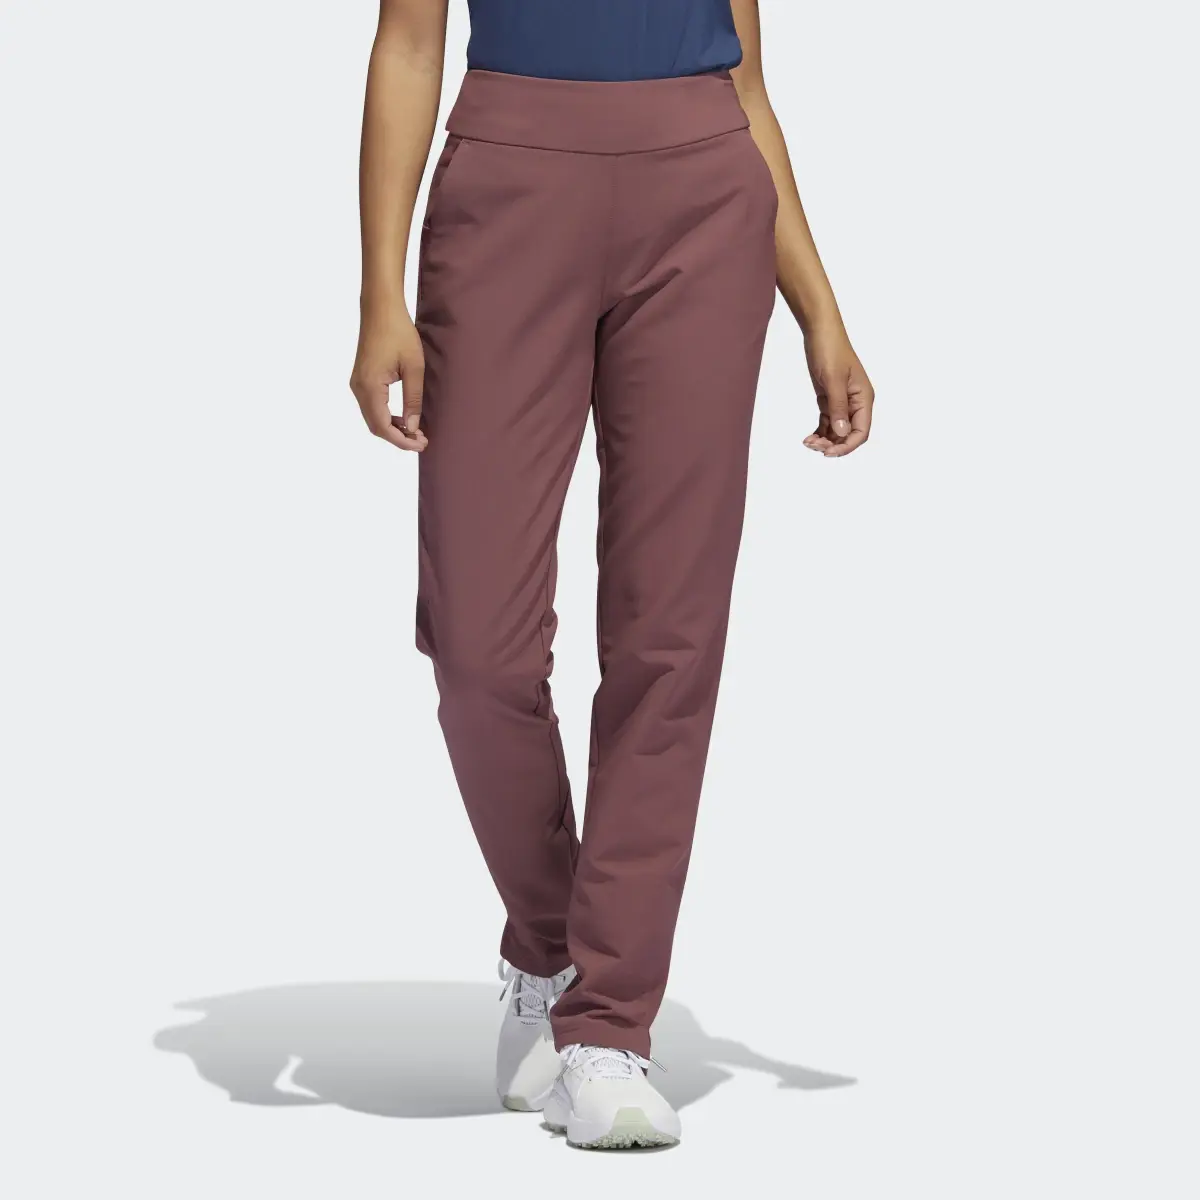 Adidas Winter Weight Pull-On Golf Pants. 1